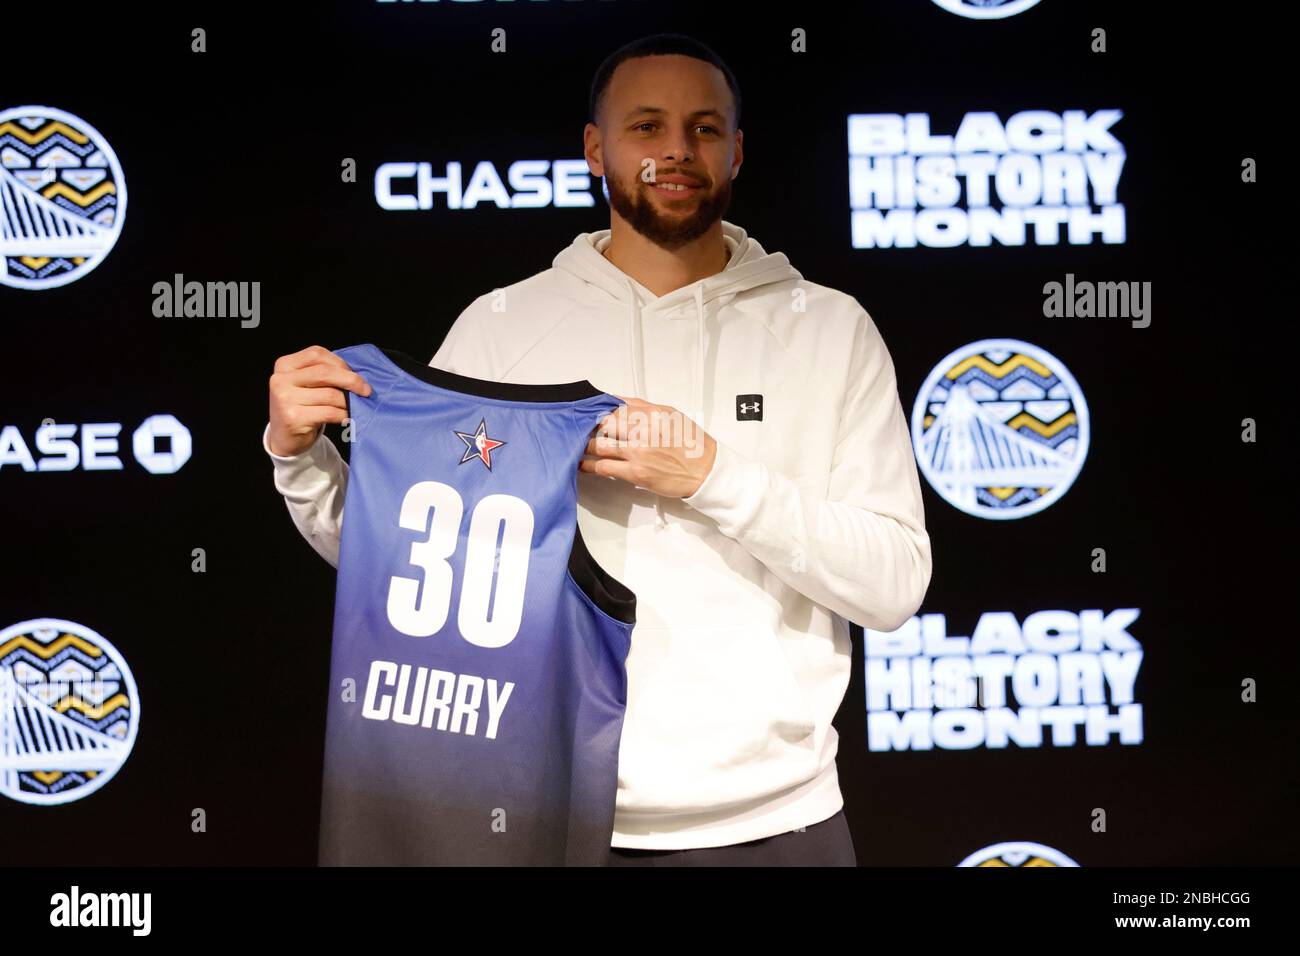 curry all star jersey